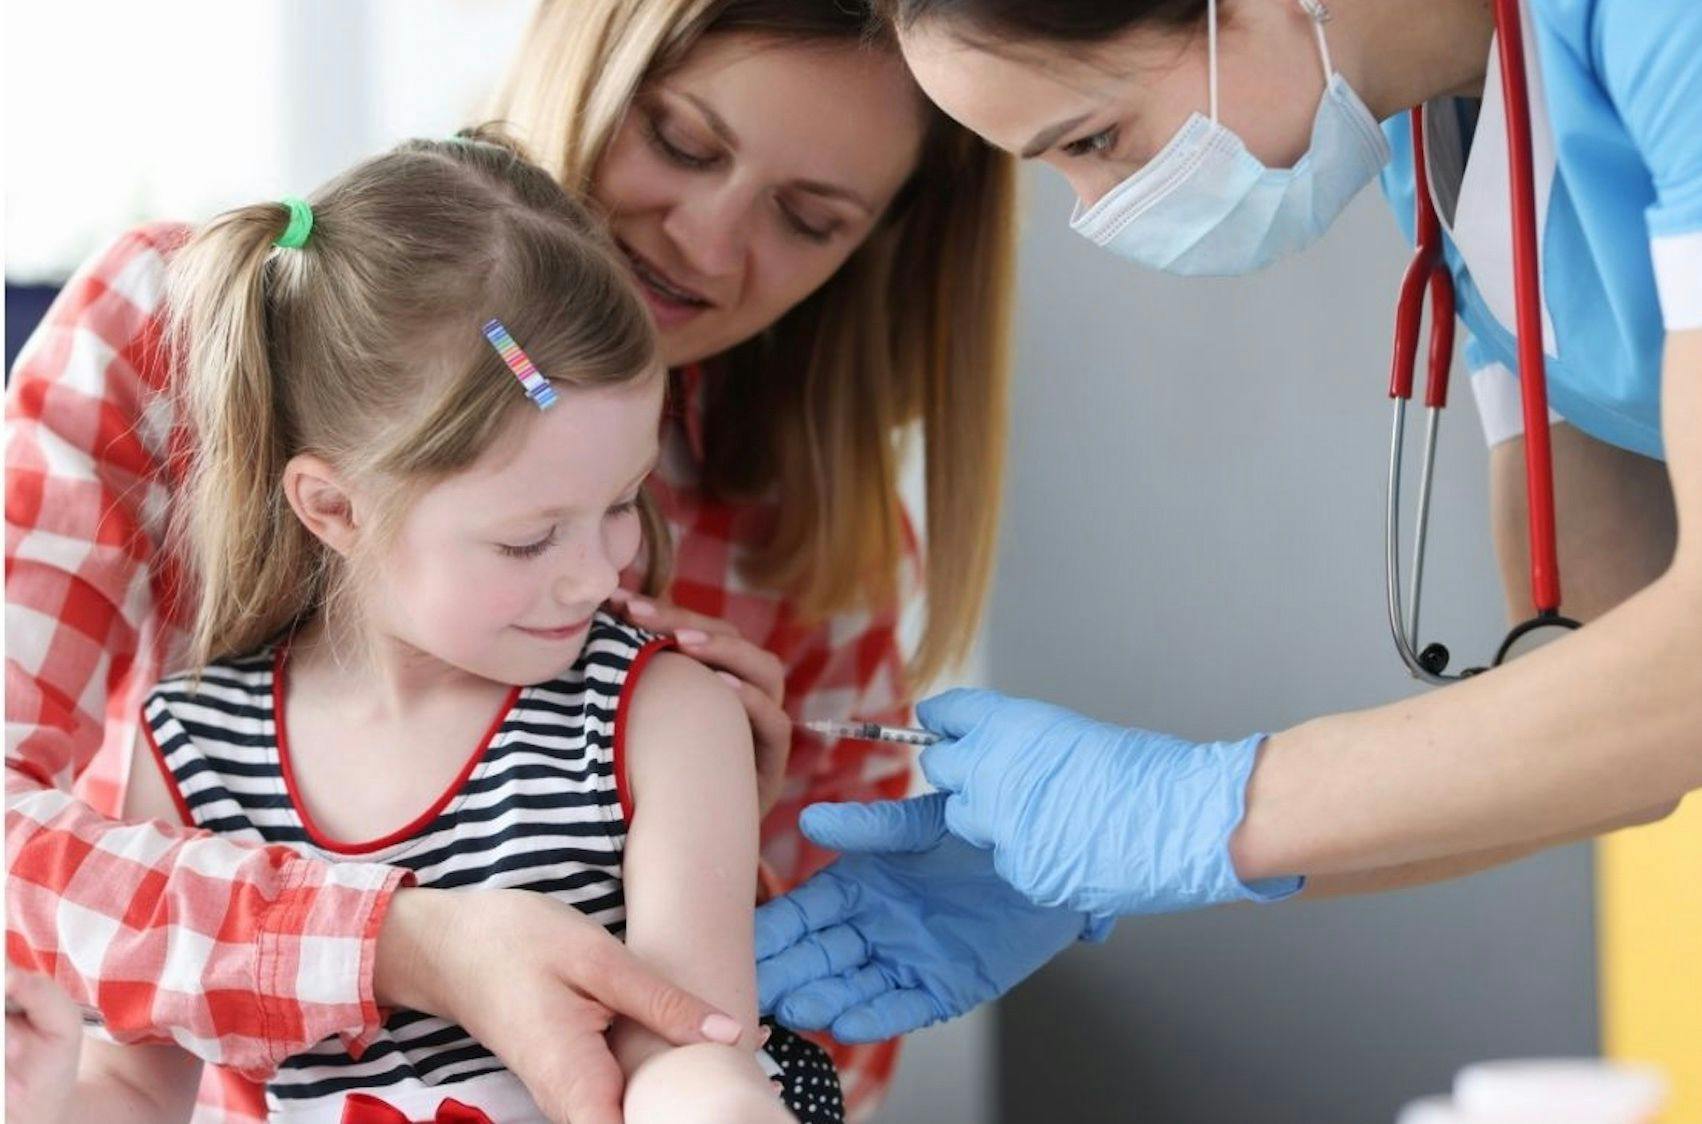 child getting vaccinated 